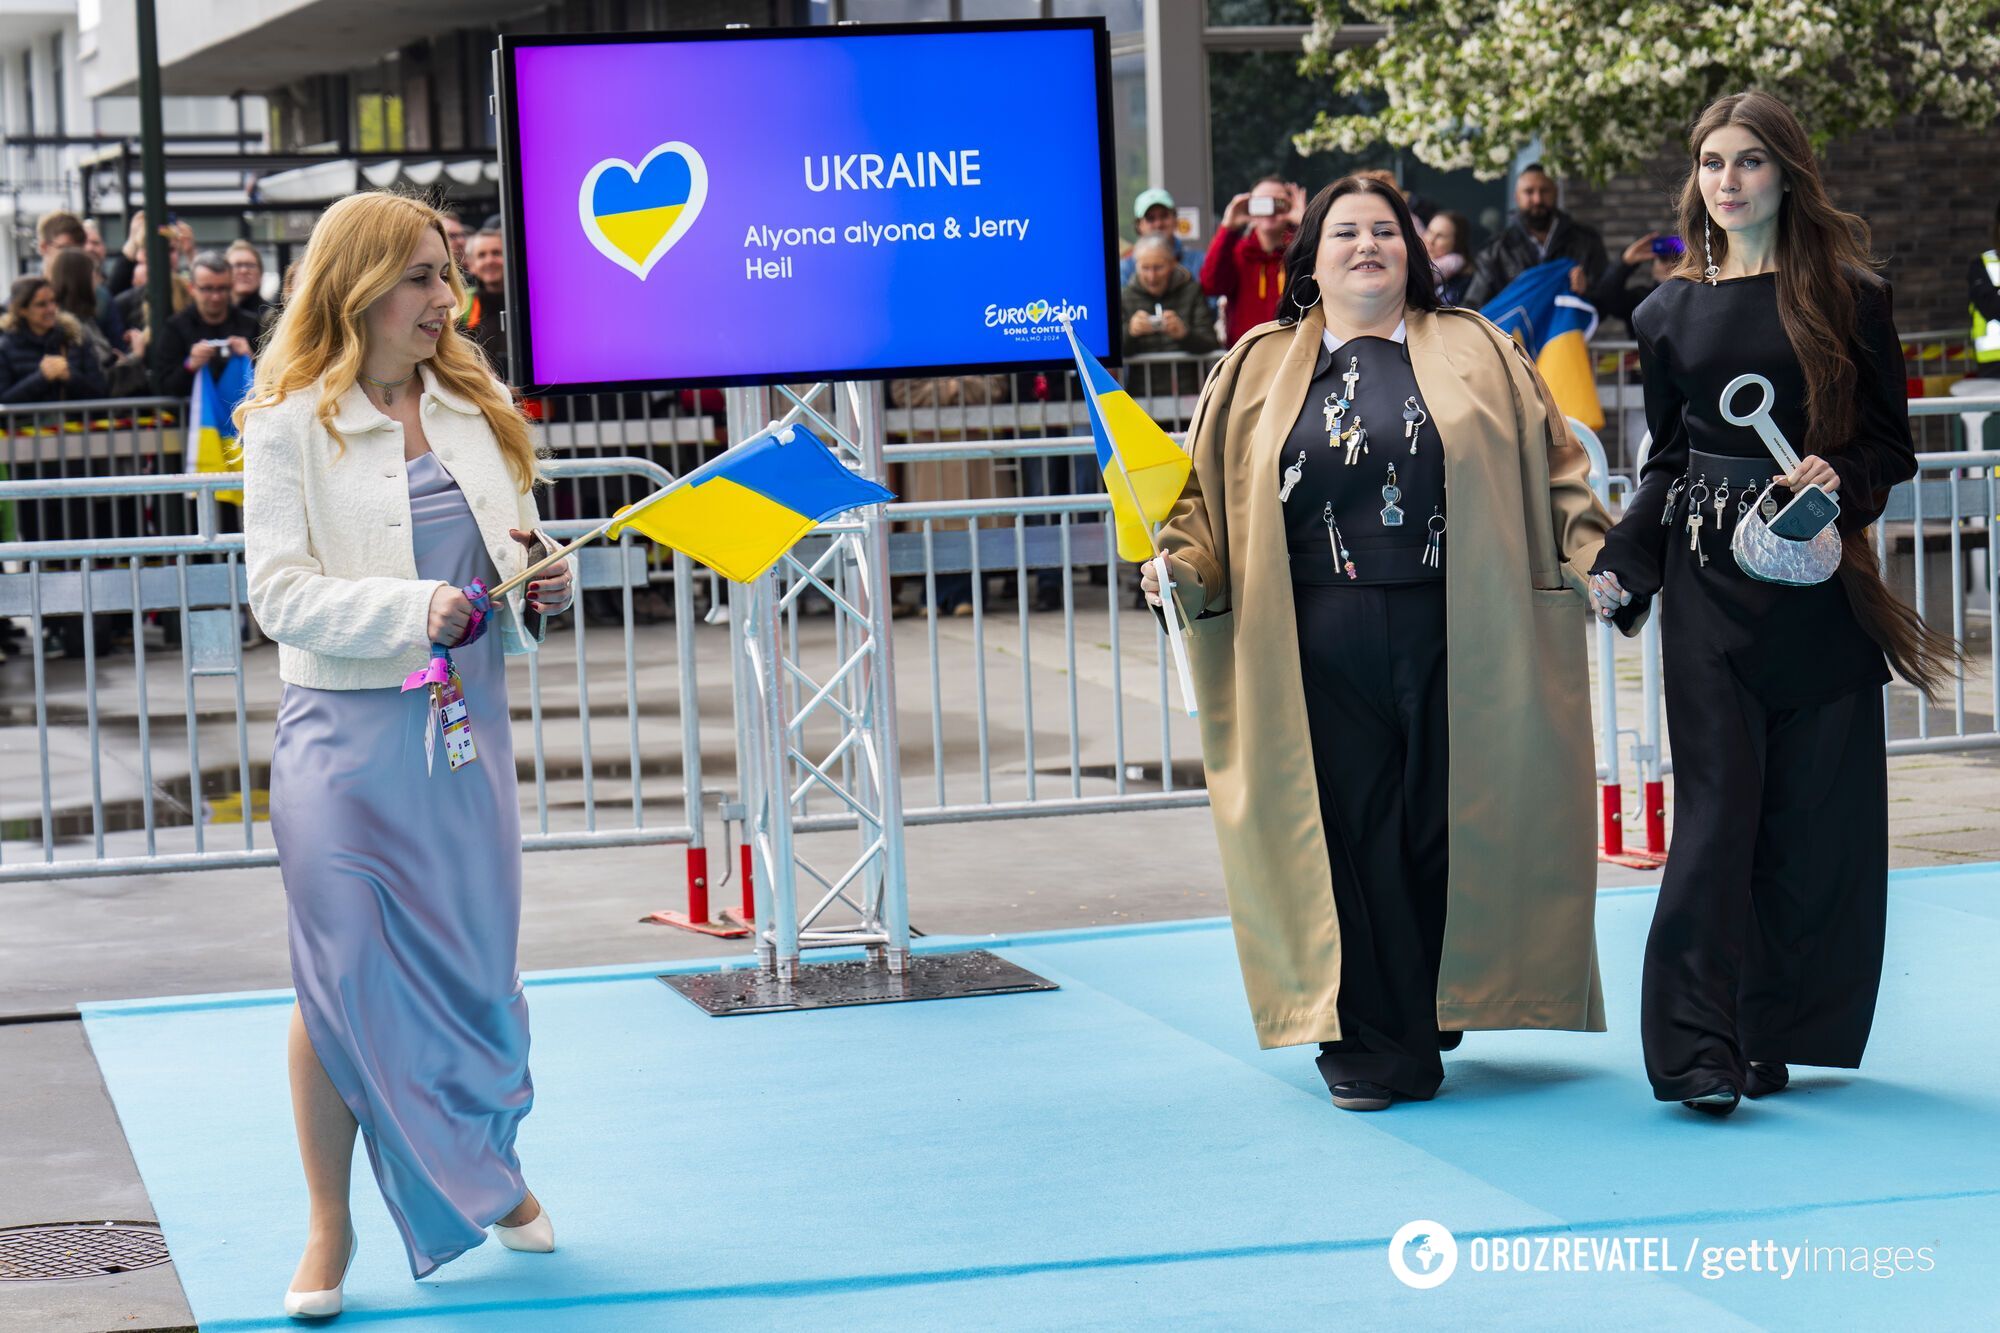 ''Alyona looks good with her hair down'' The images of alyona alyona & Jerry Heil at the opening ceremony of Eurovision 2024 amazed the network